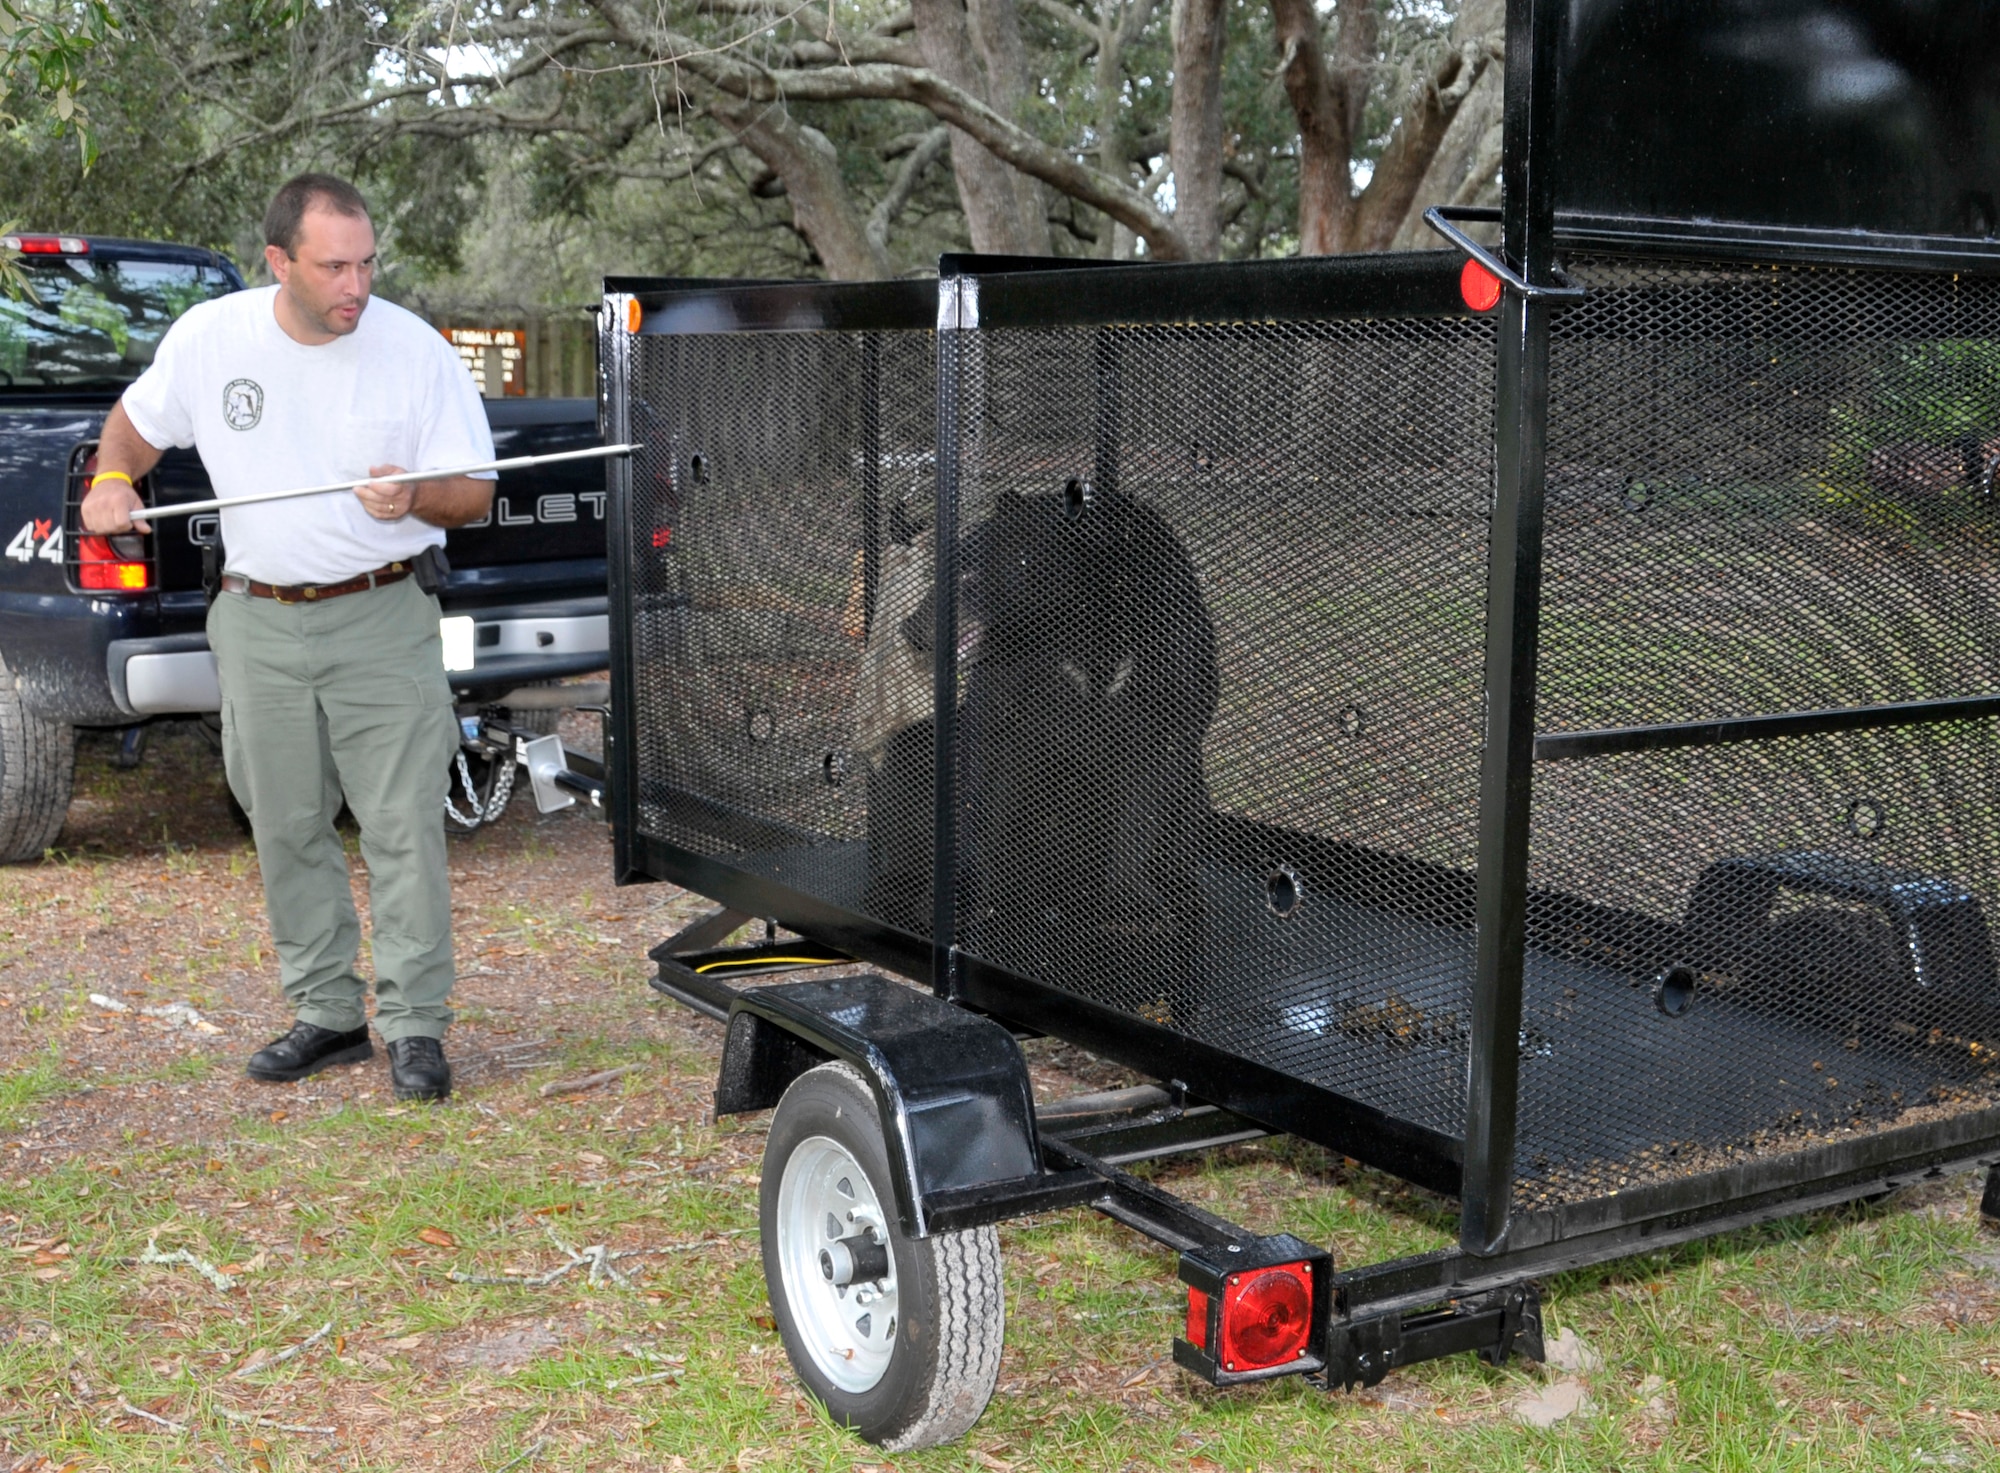 Derek Fuzzel from the Florida Fish and Wildlife Conservation, tranquilizes the 175-pound female bear captured on Tyndall Air Force Base housing Sept. 11. (U.S. Air Force photo courtesy of Lisa Norman)